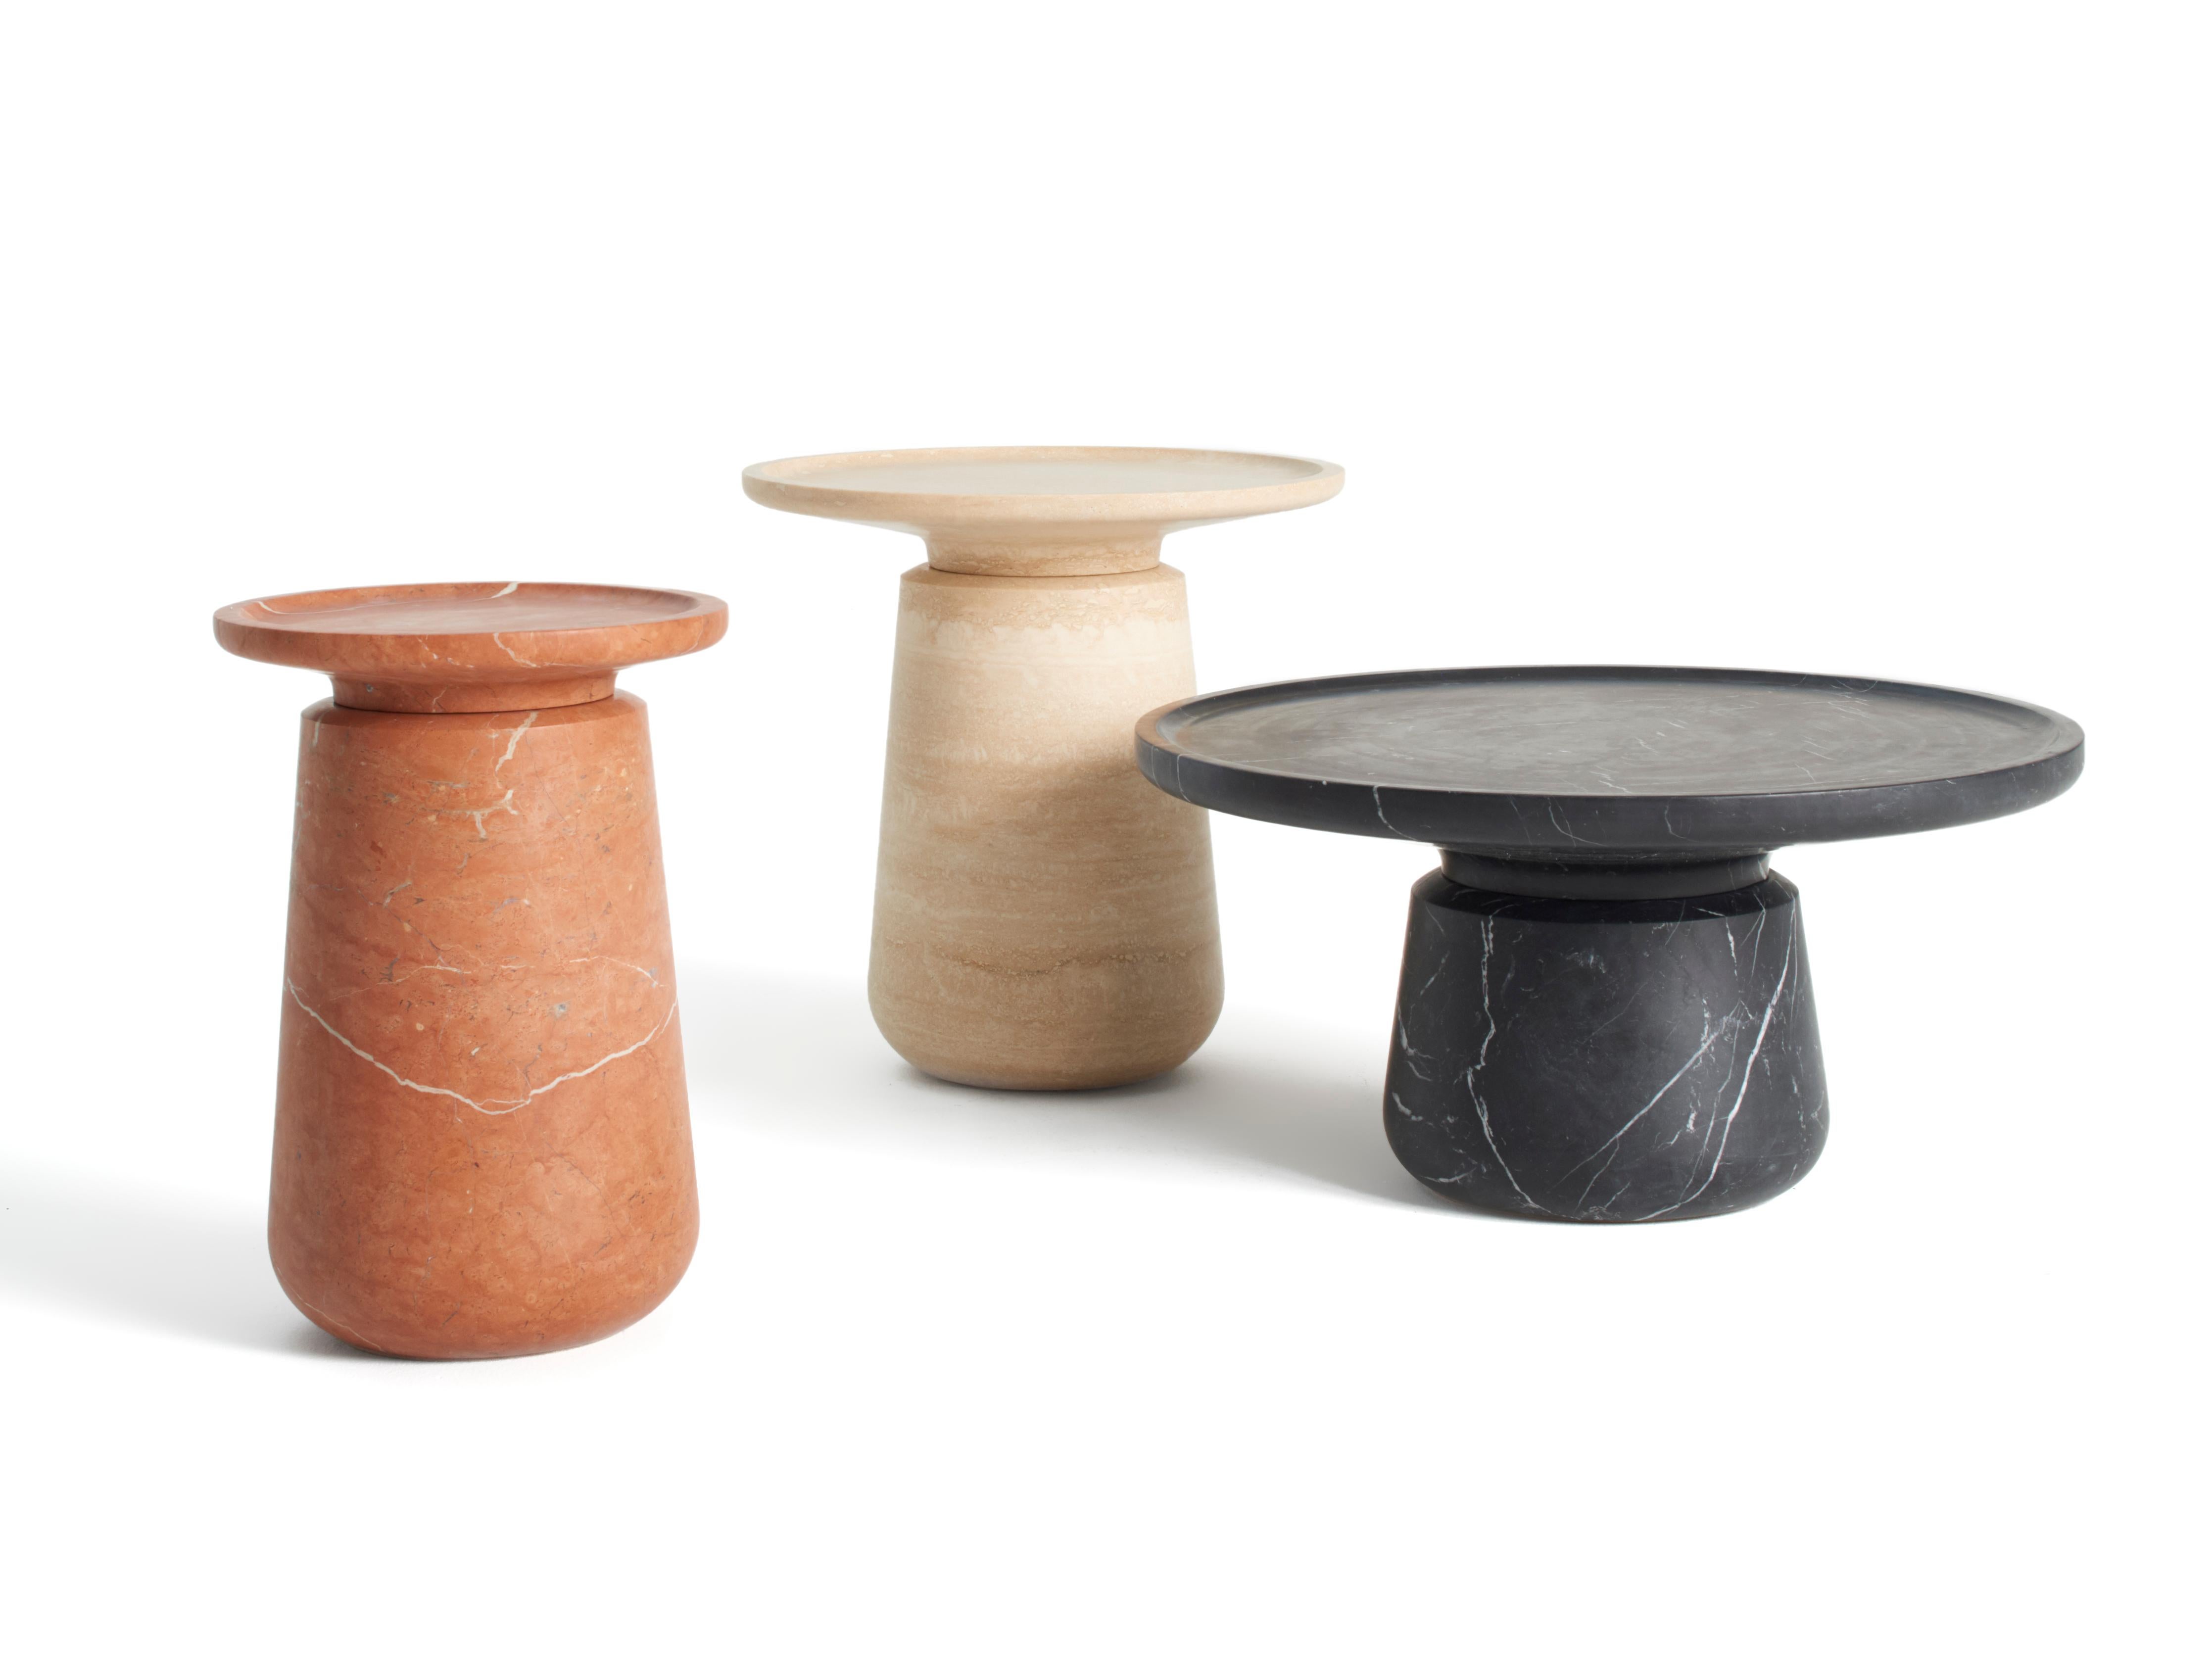 Set of 3 marble Altana side table by Ivan Colominas
Dimensions: 29.4 x 75 x 36, 23 x 54 x 54, 23 x 38 x 54
Materials: Nero Marquinia, Travertino, Rosso Alicante

Ivan Colominas studied Industrial Design at the UCH-CEU in Valencia, where he also